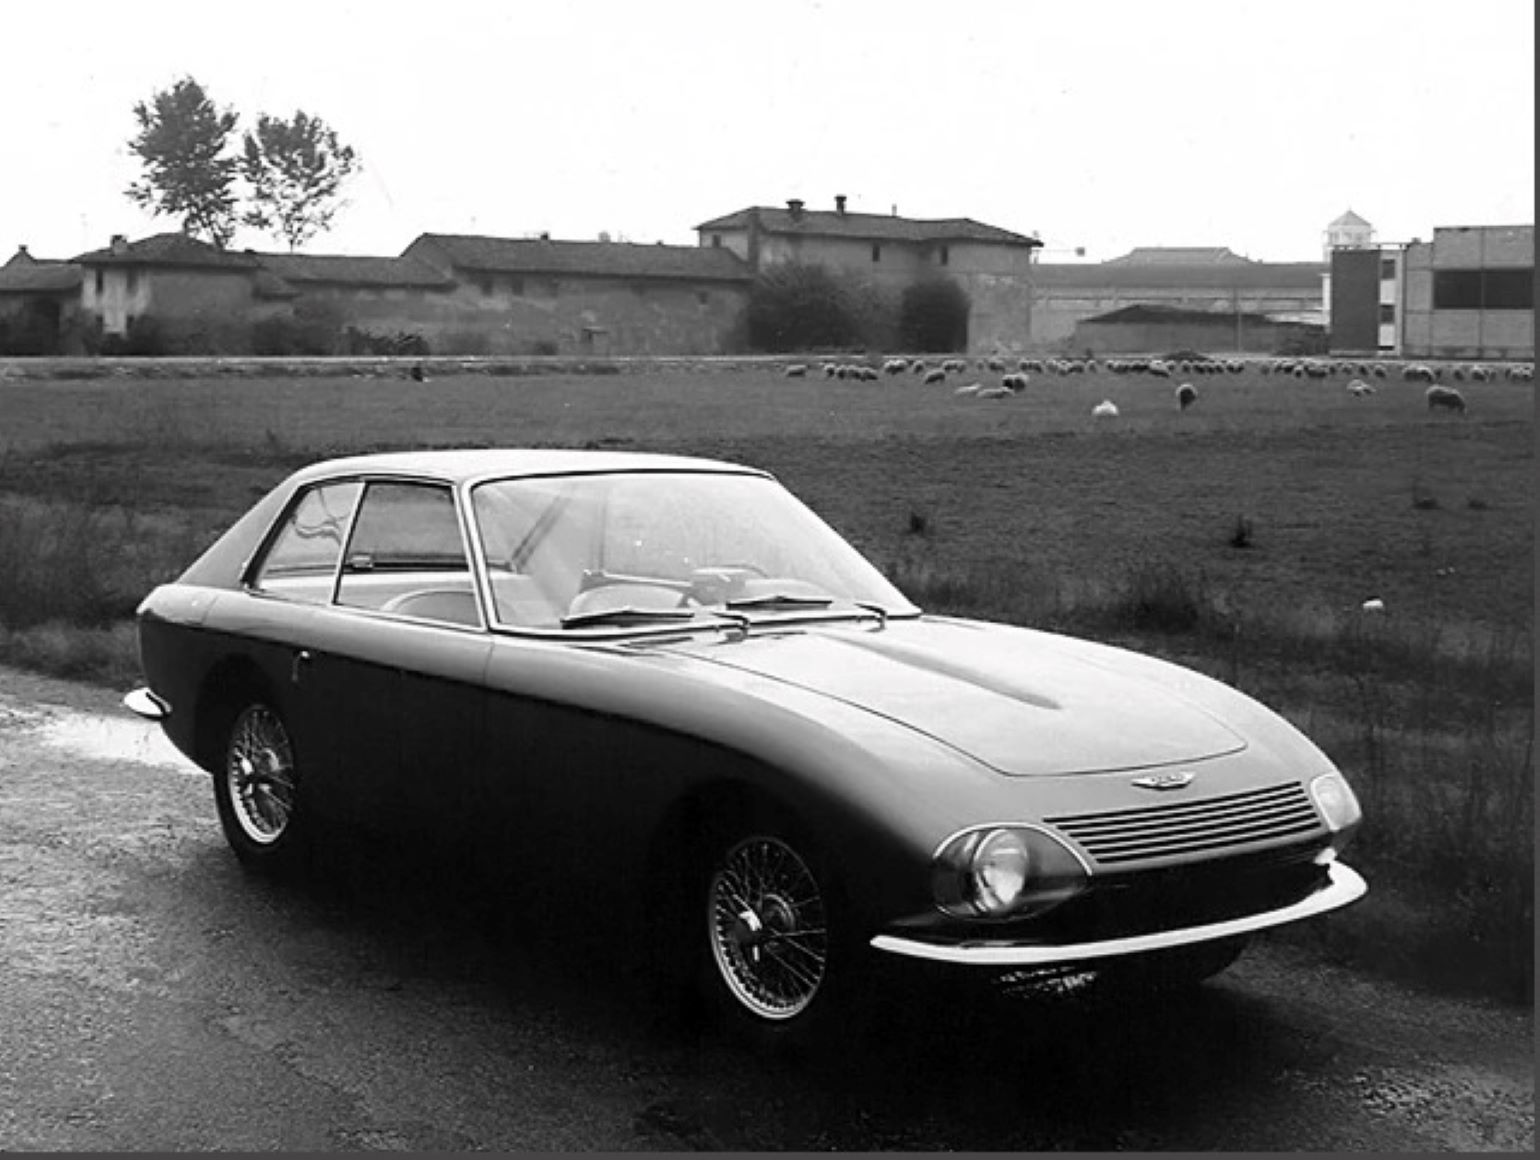 Name:  AH 3000 #2121 AH 3000 Coupe Pininfarina photo front 3-4 arch Classic and Recreation Sportscars.jpg
Views: 211
Size:  171.0 KB